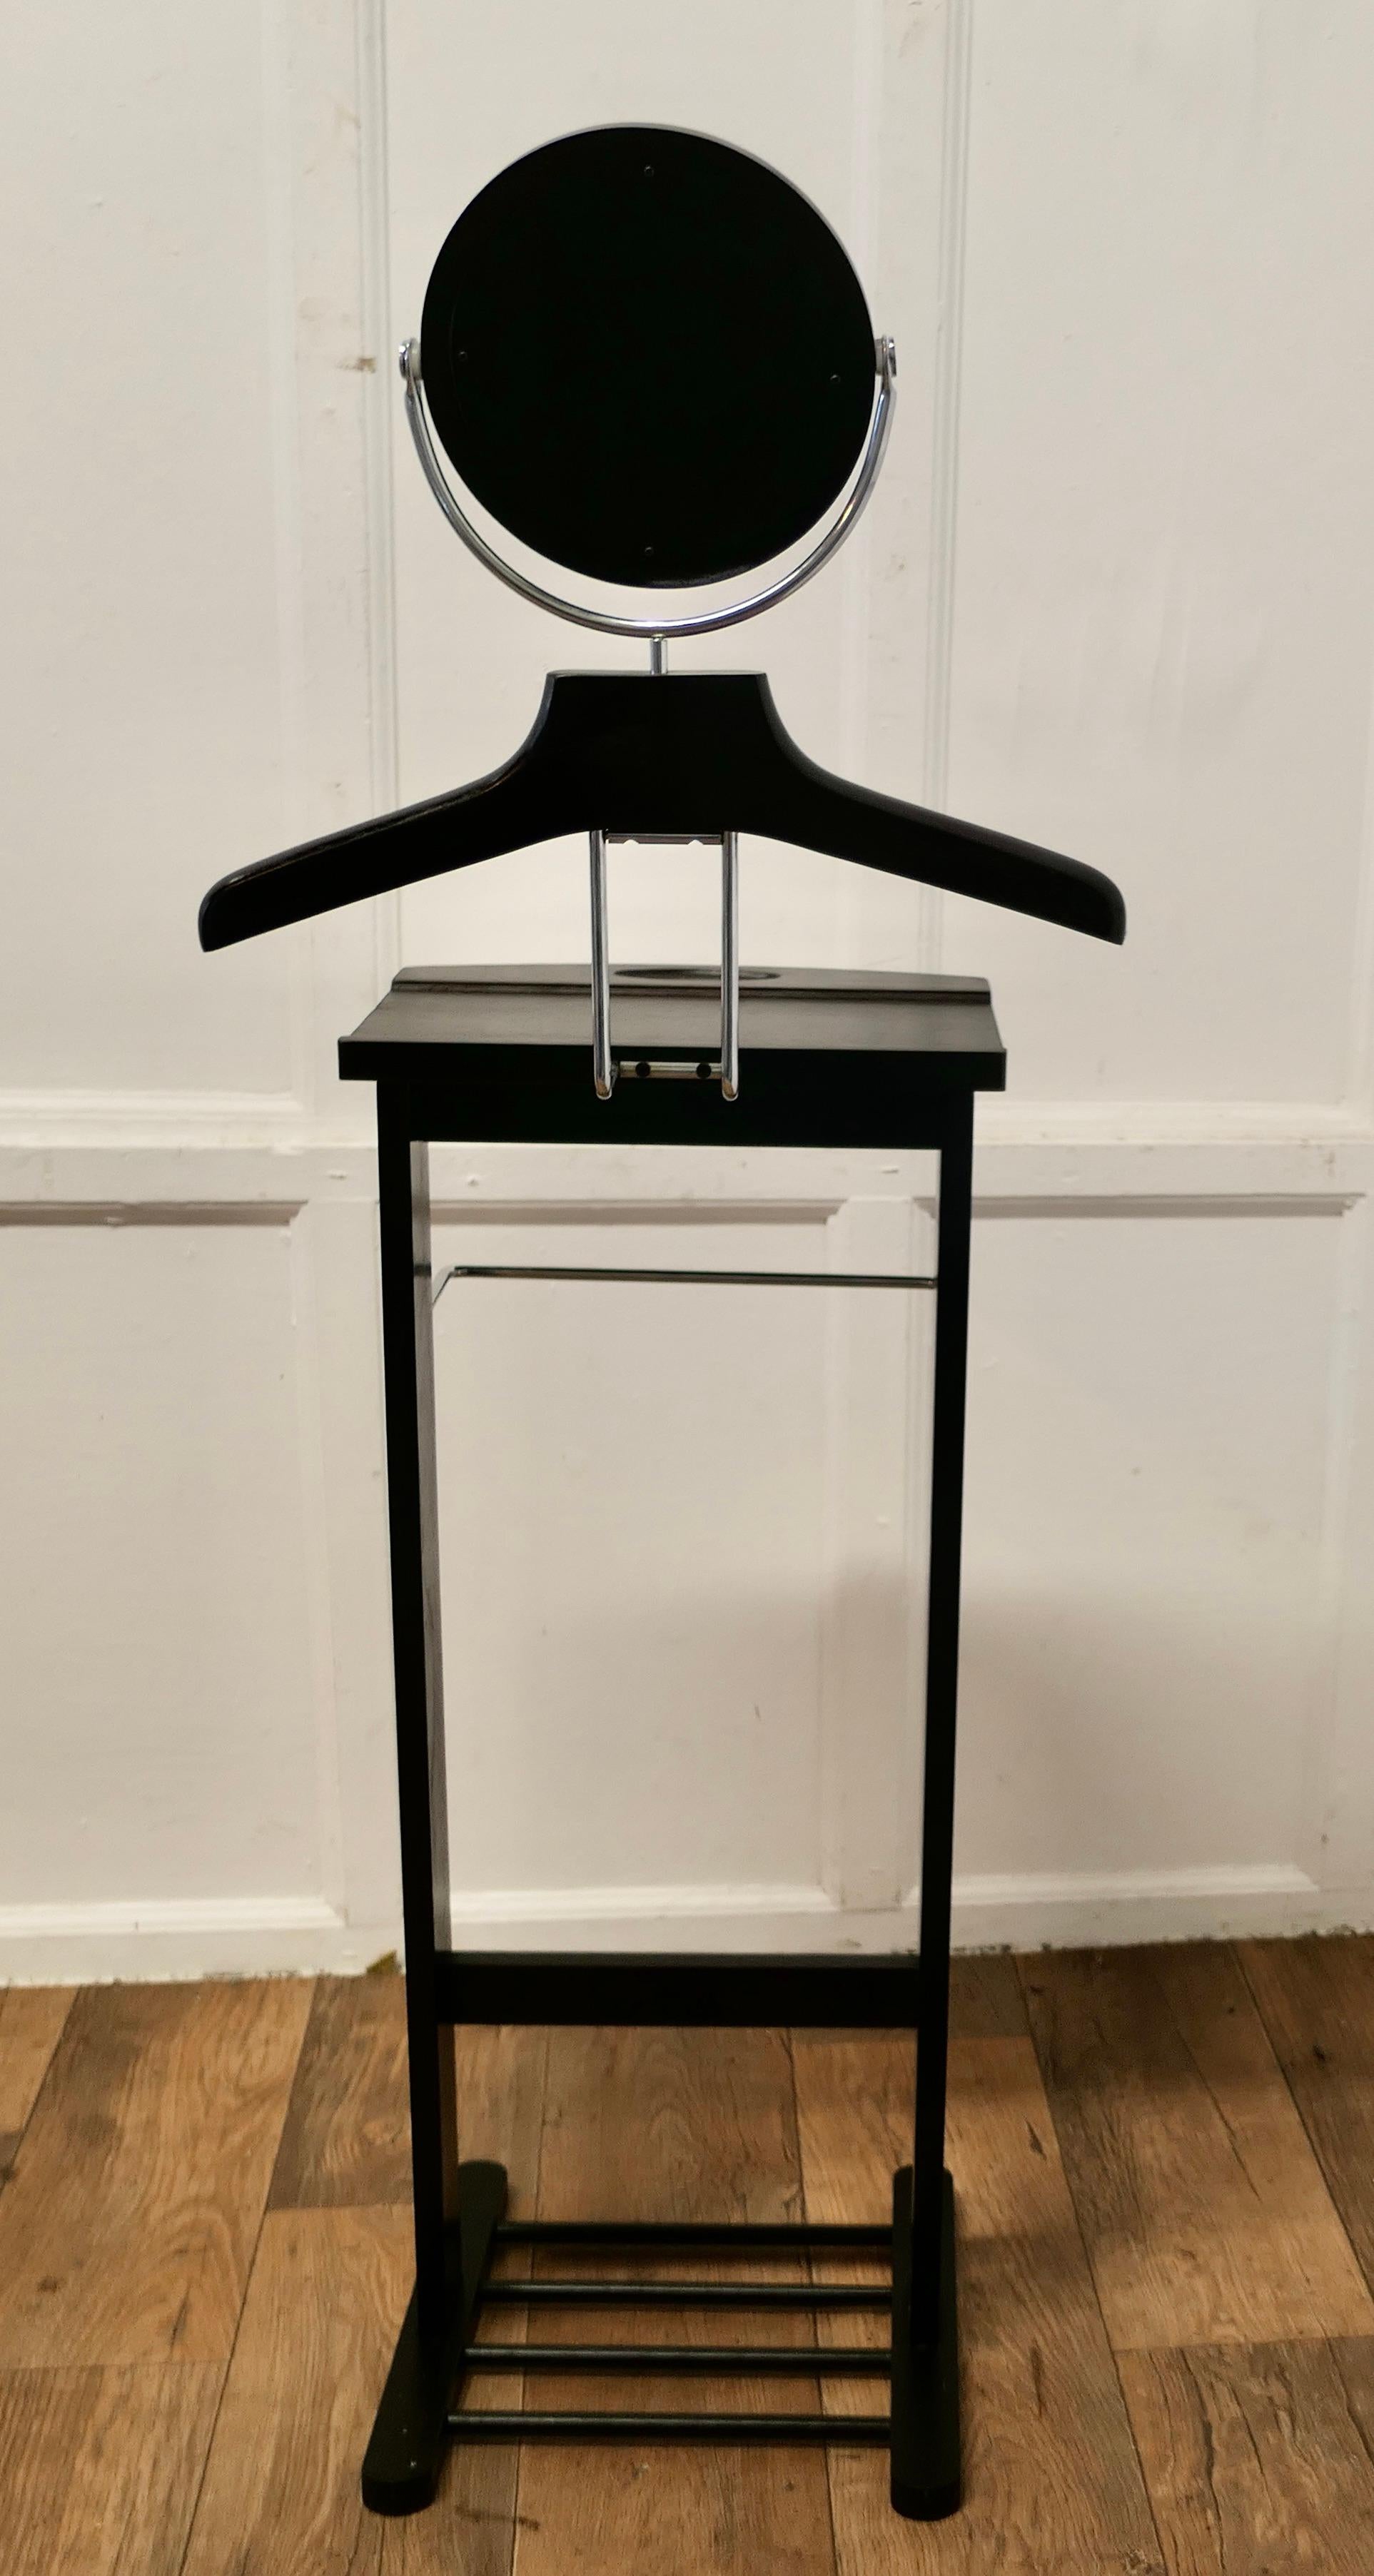 Art Deco Style Gentleman’s Suit Hanger or Night Stand, Bedroom Valet,

A very useful piece, the hanger or clothes stand is in Black Lacquer, it has a circular vanity mirror, a hanger which will accommodate a jacket it also has a separate rail for